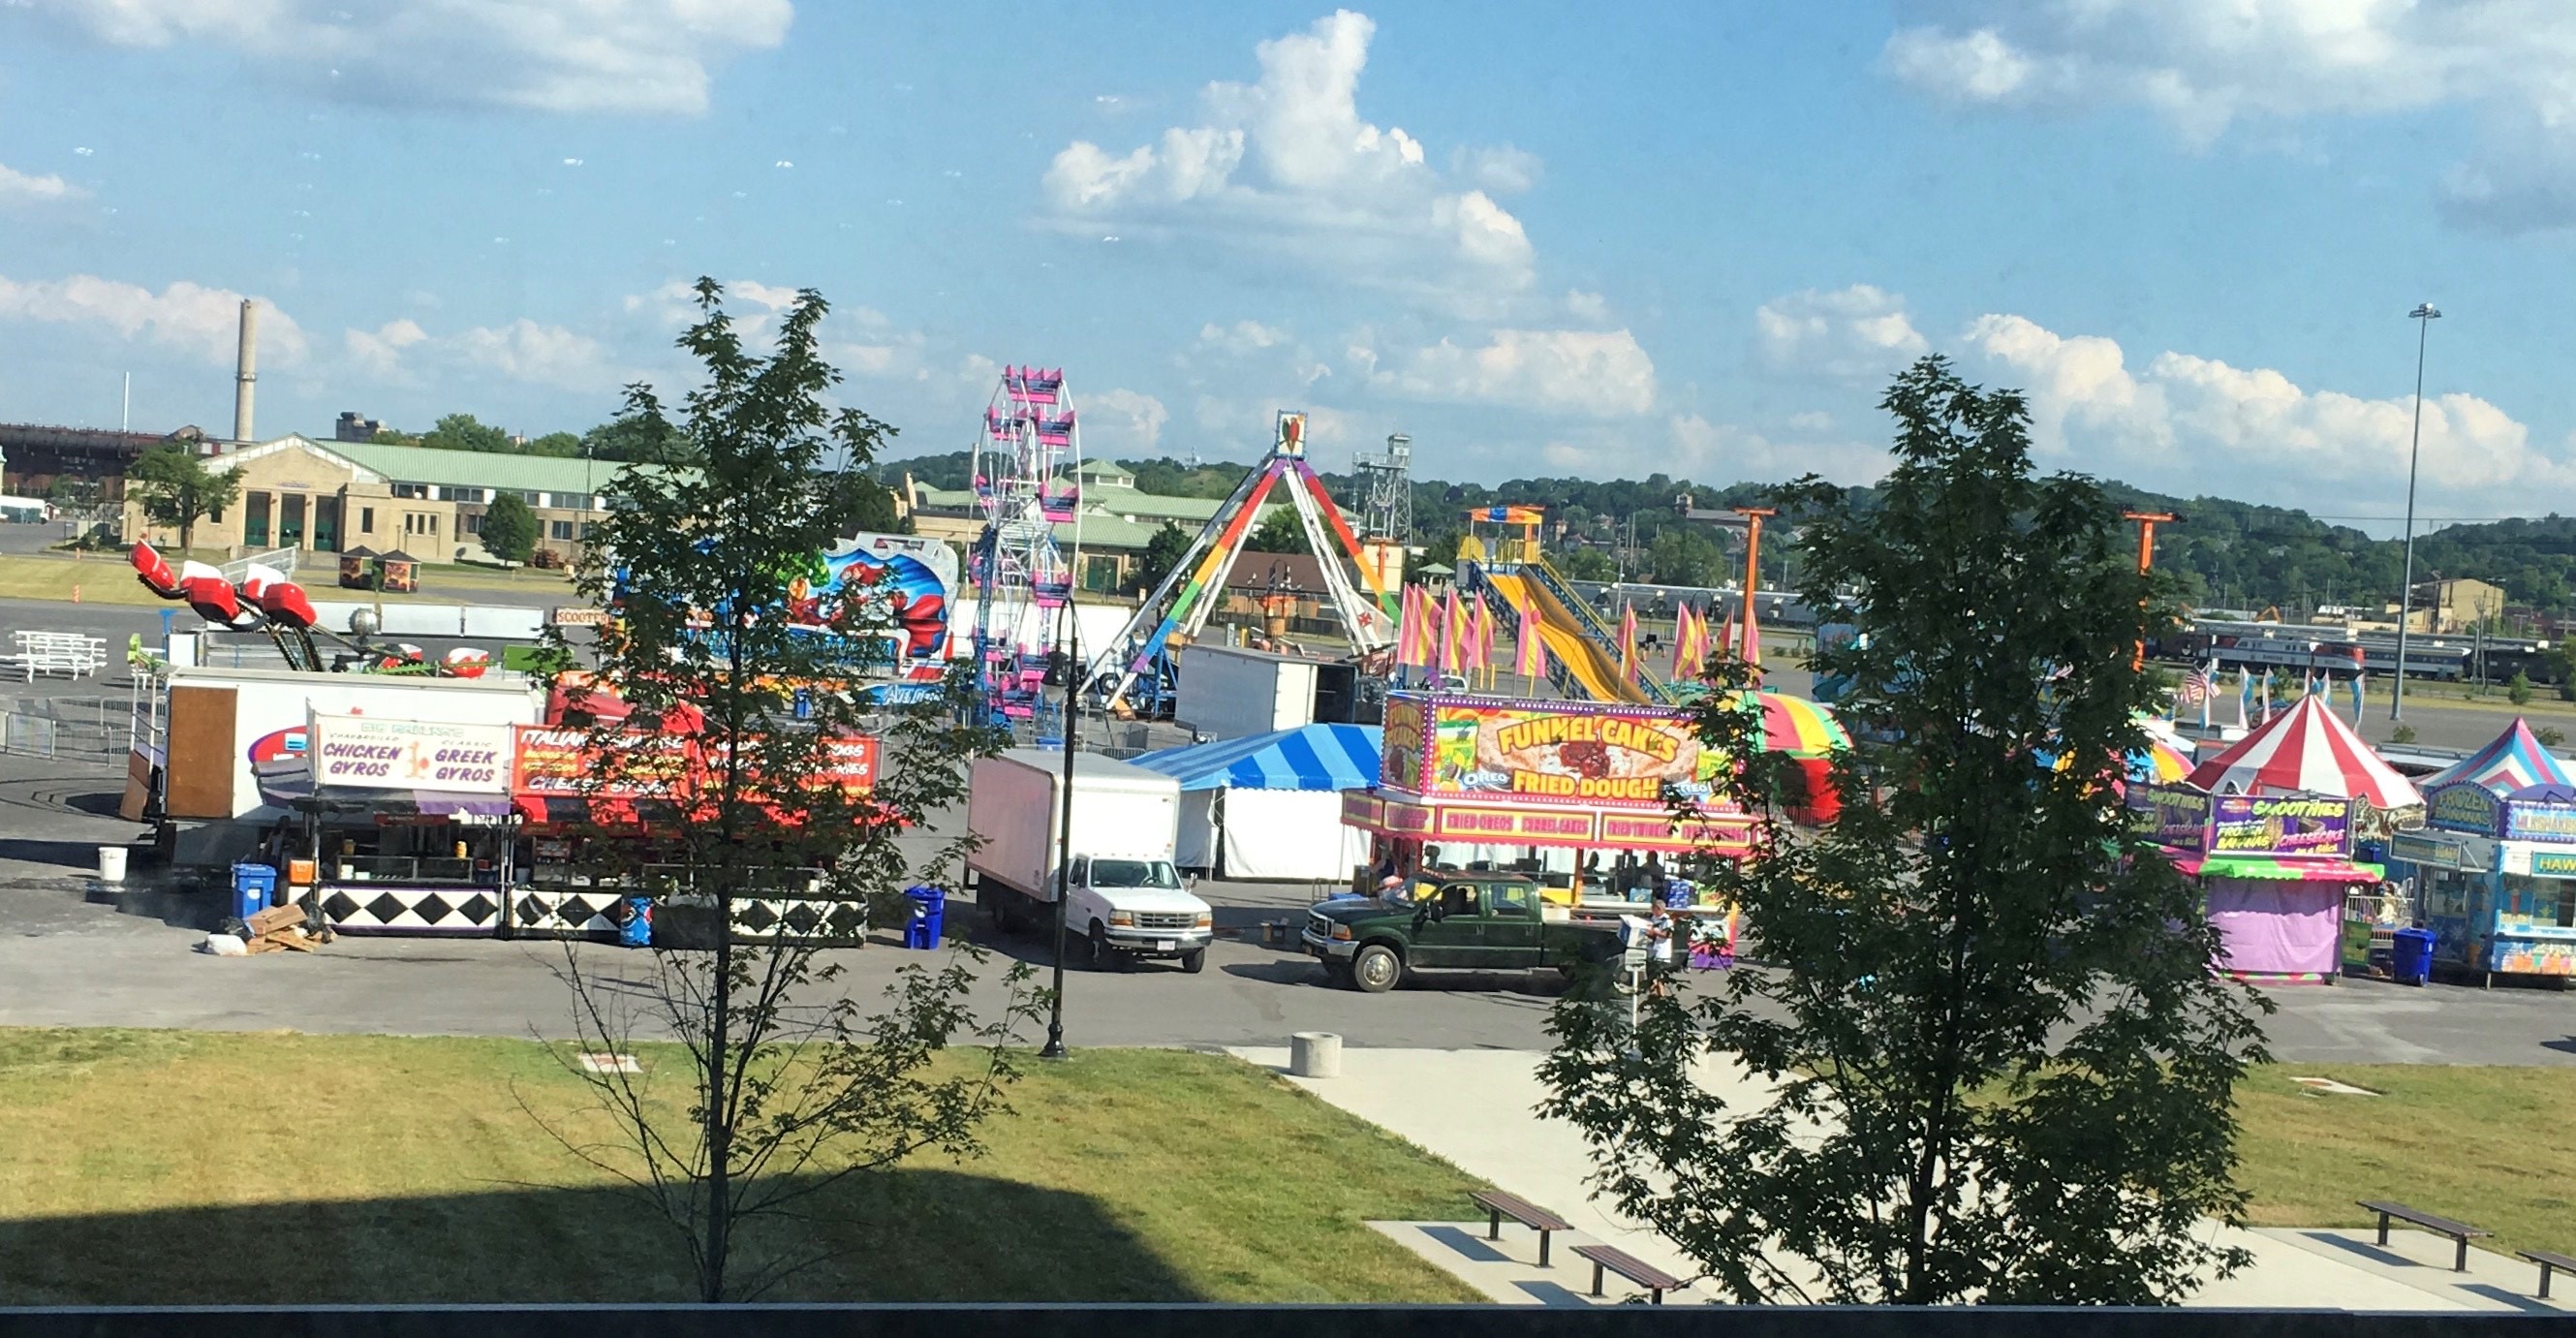 Rides And Games Coming To The Ny State Fair Food Fest Starting This Week Syracuse Com